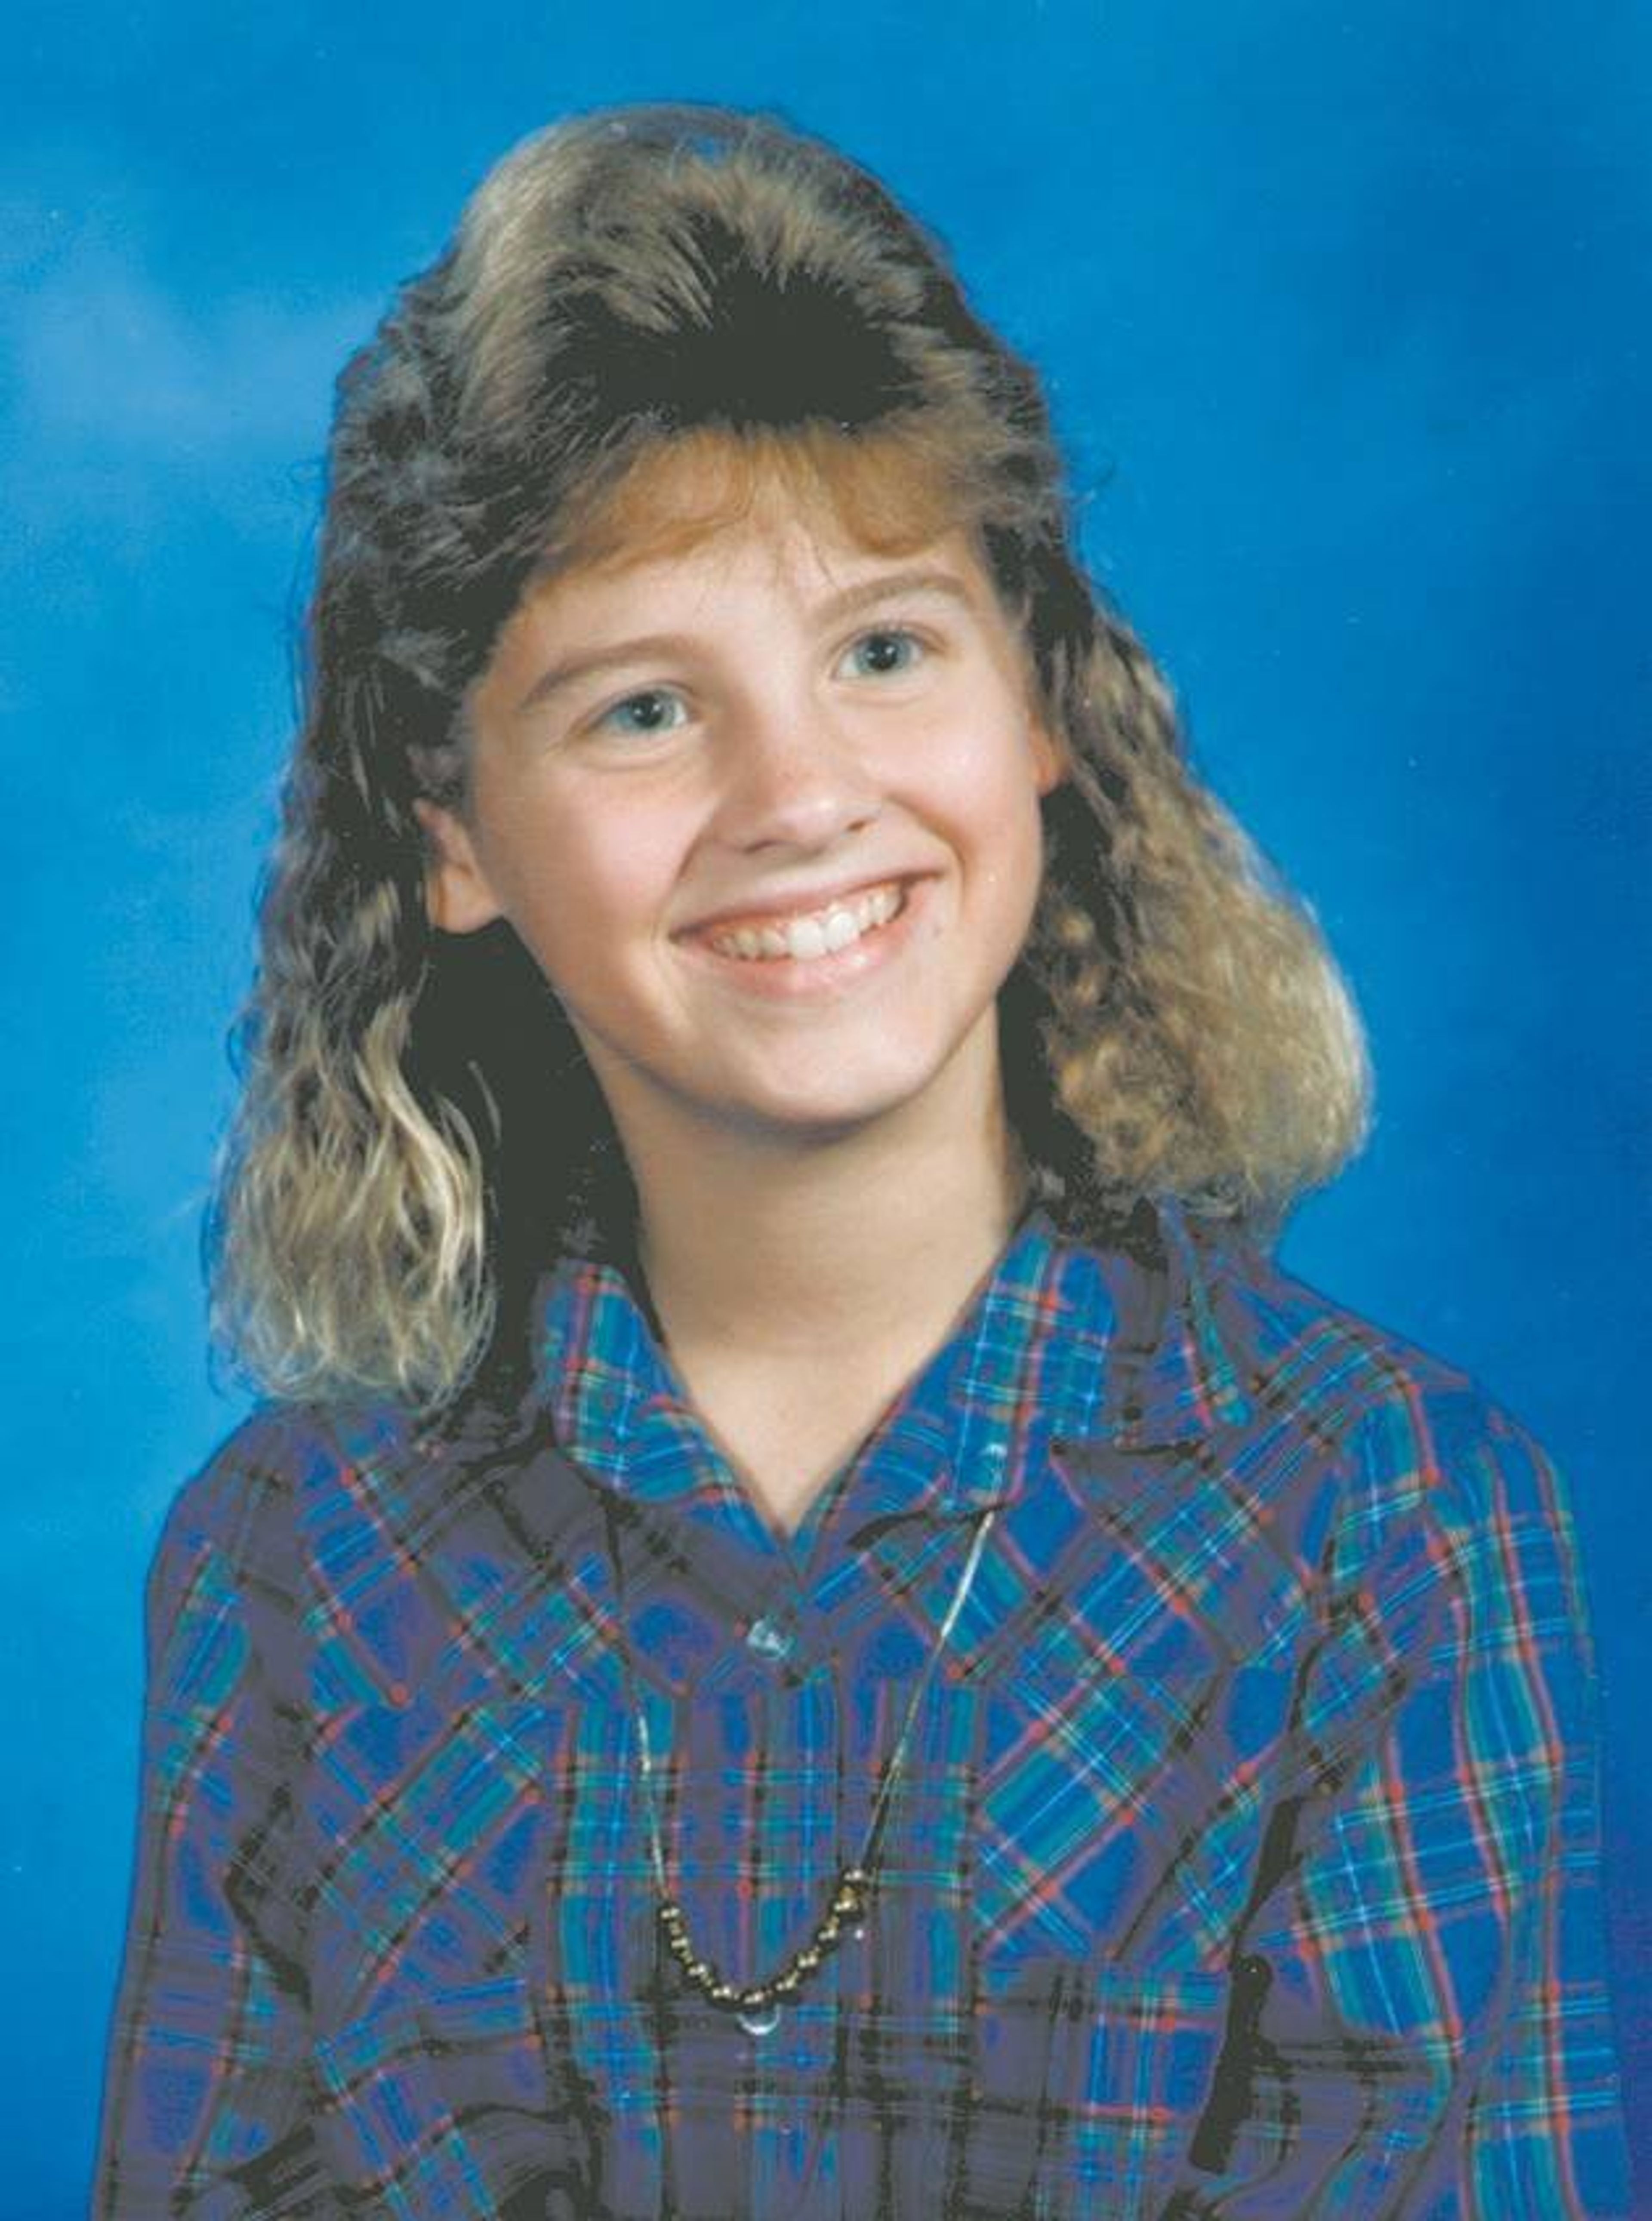 Bollinger County search related to girl missing since 1989